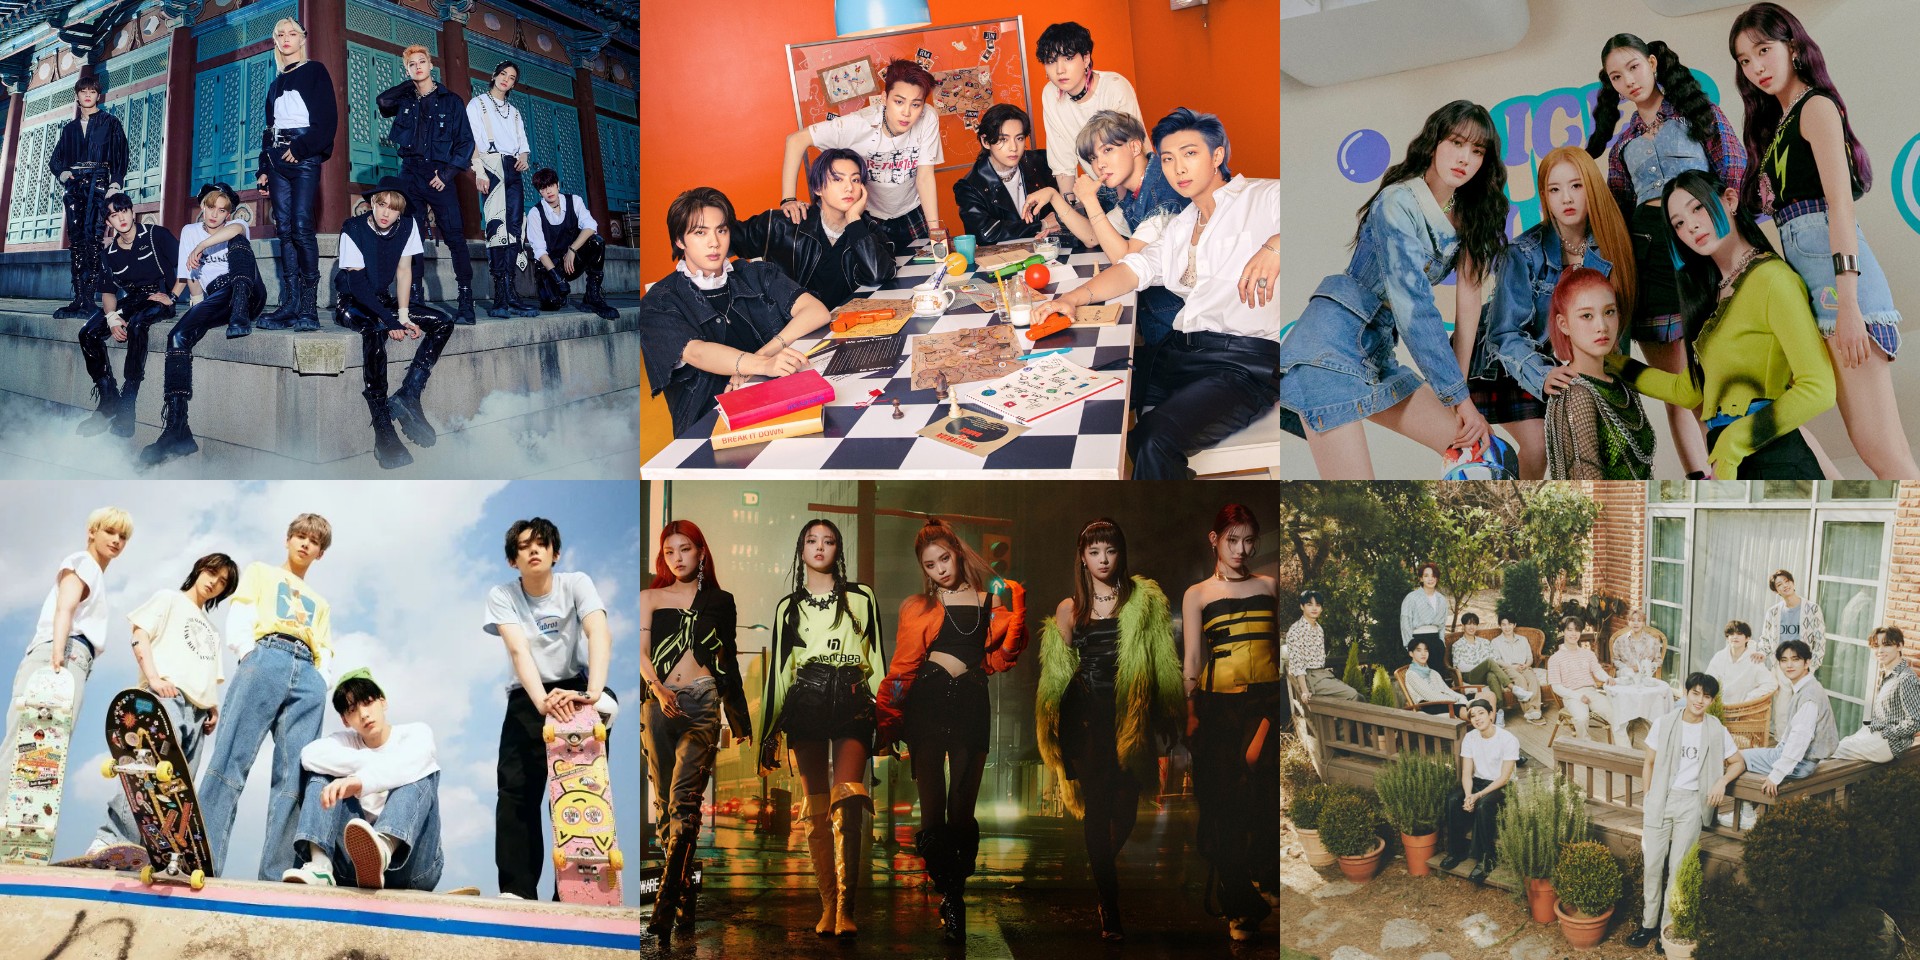 Here are the winners of The Fact Music Awards 2021 – BTS, SEVENTEEN, STAYC, ITZY, Stray Kids, TXT, and more